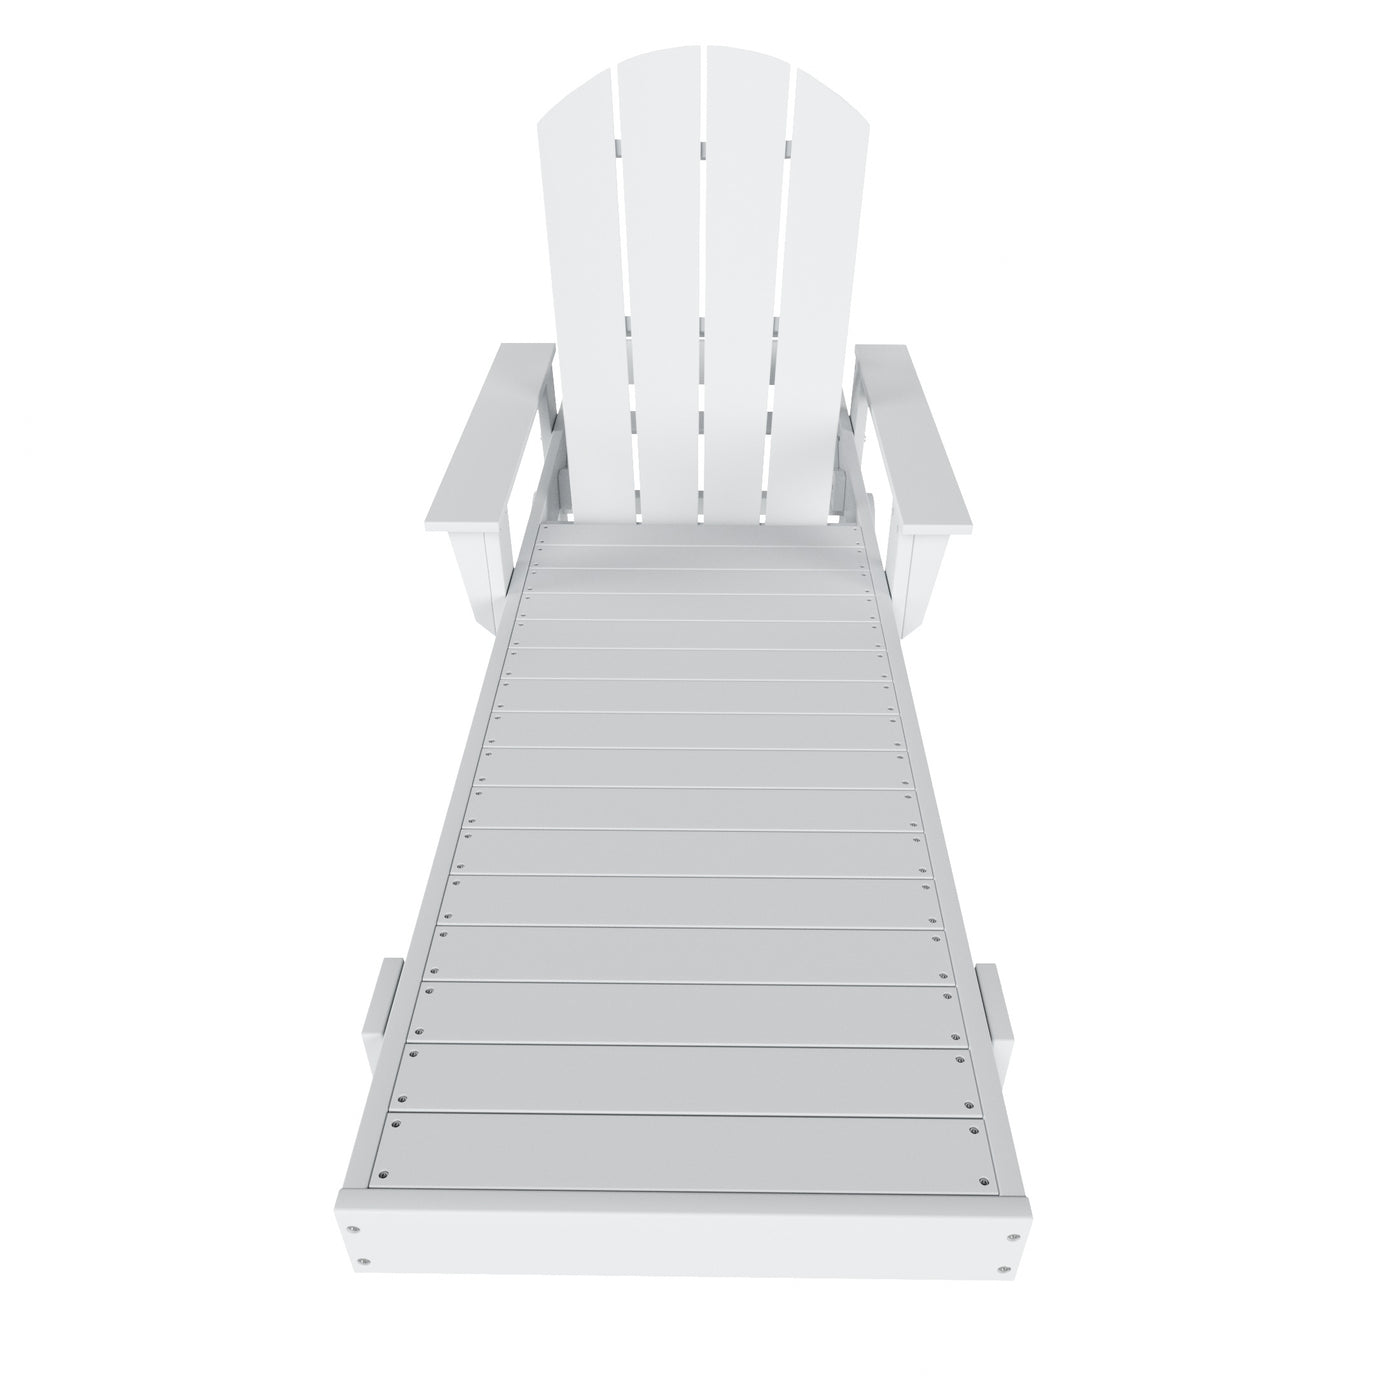 Malibu Reclining Chaise Lounge With Arms & Wheels